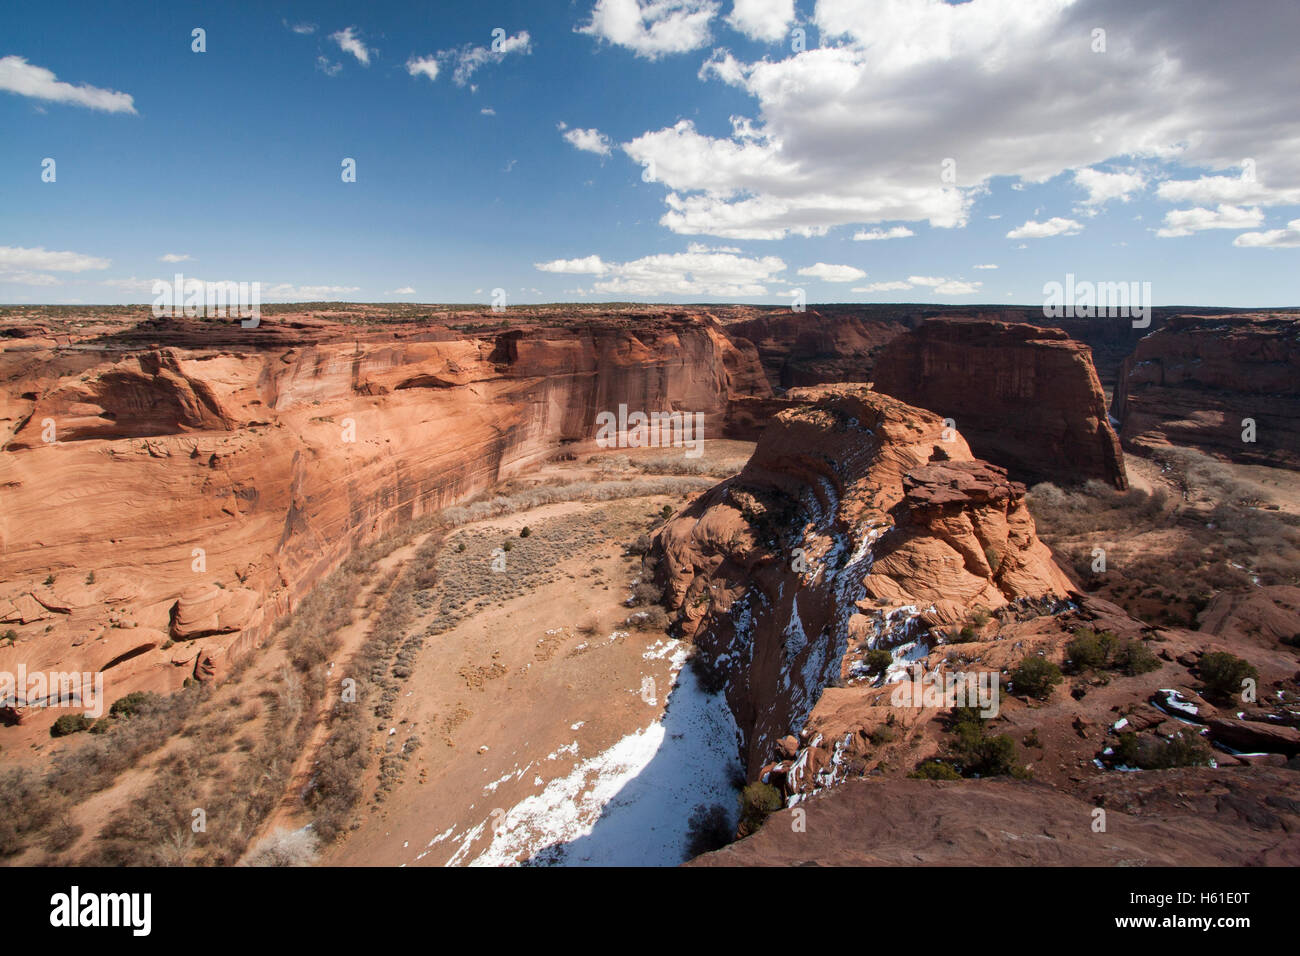 View from the rim of Canyon de Chelly National Monument, Arizona Stock Photo